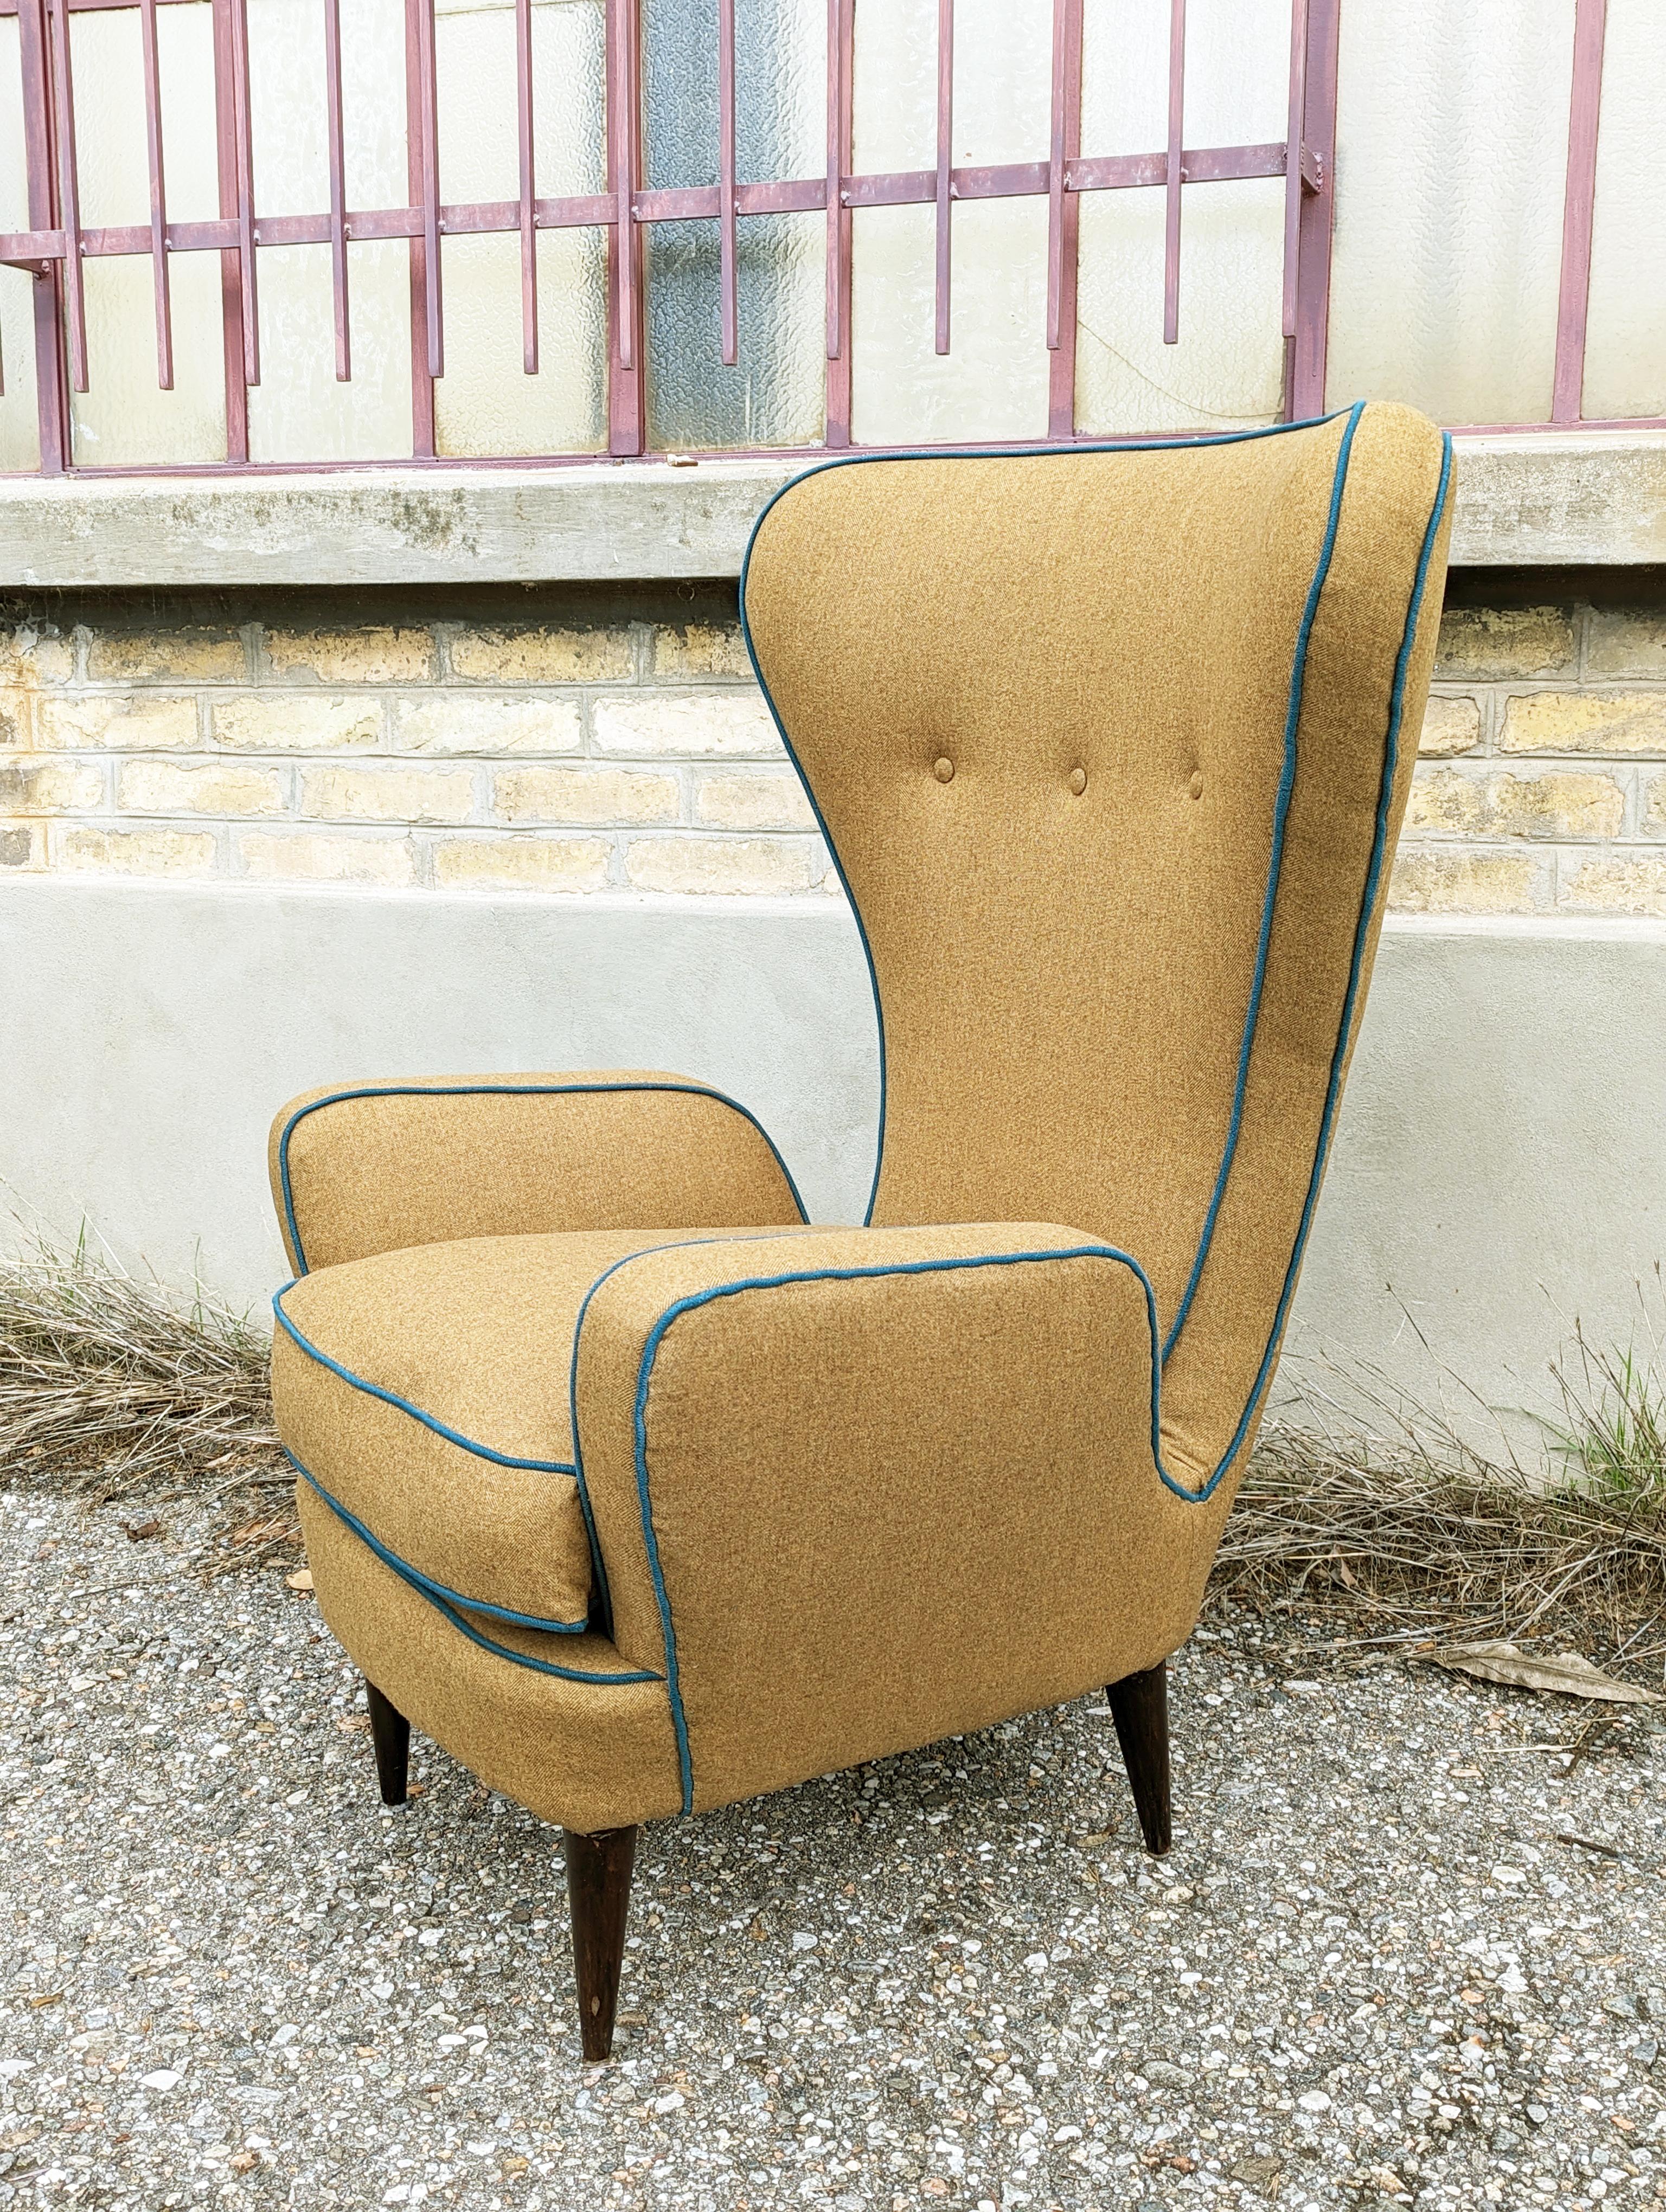 Teal & brown fabric 1950s highback armchair by Sala & Madini for Galimberti  For Sale 2